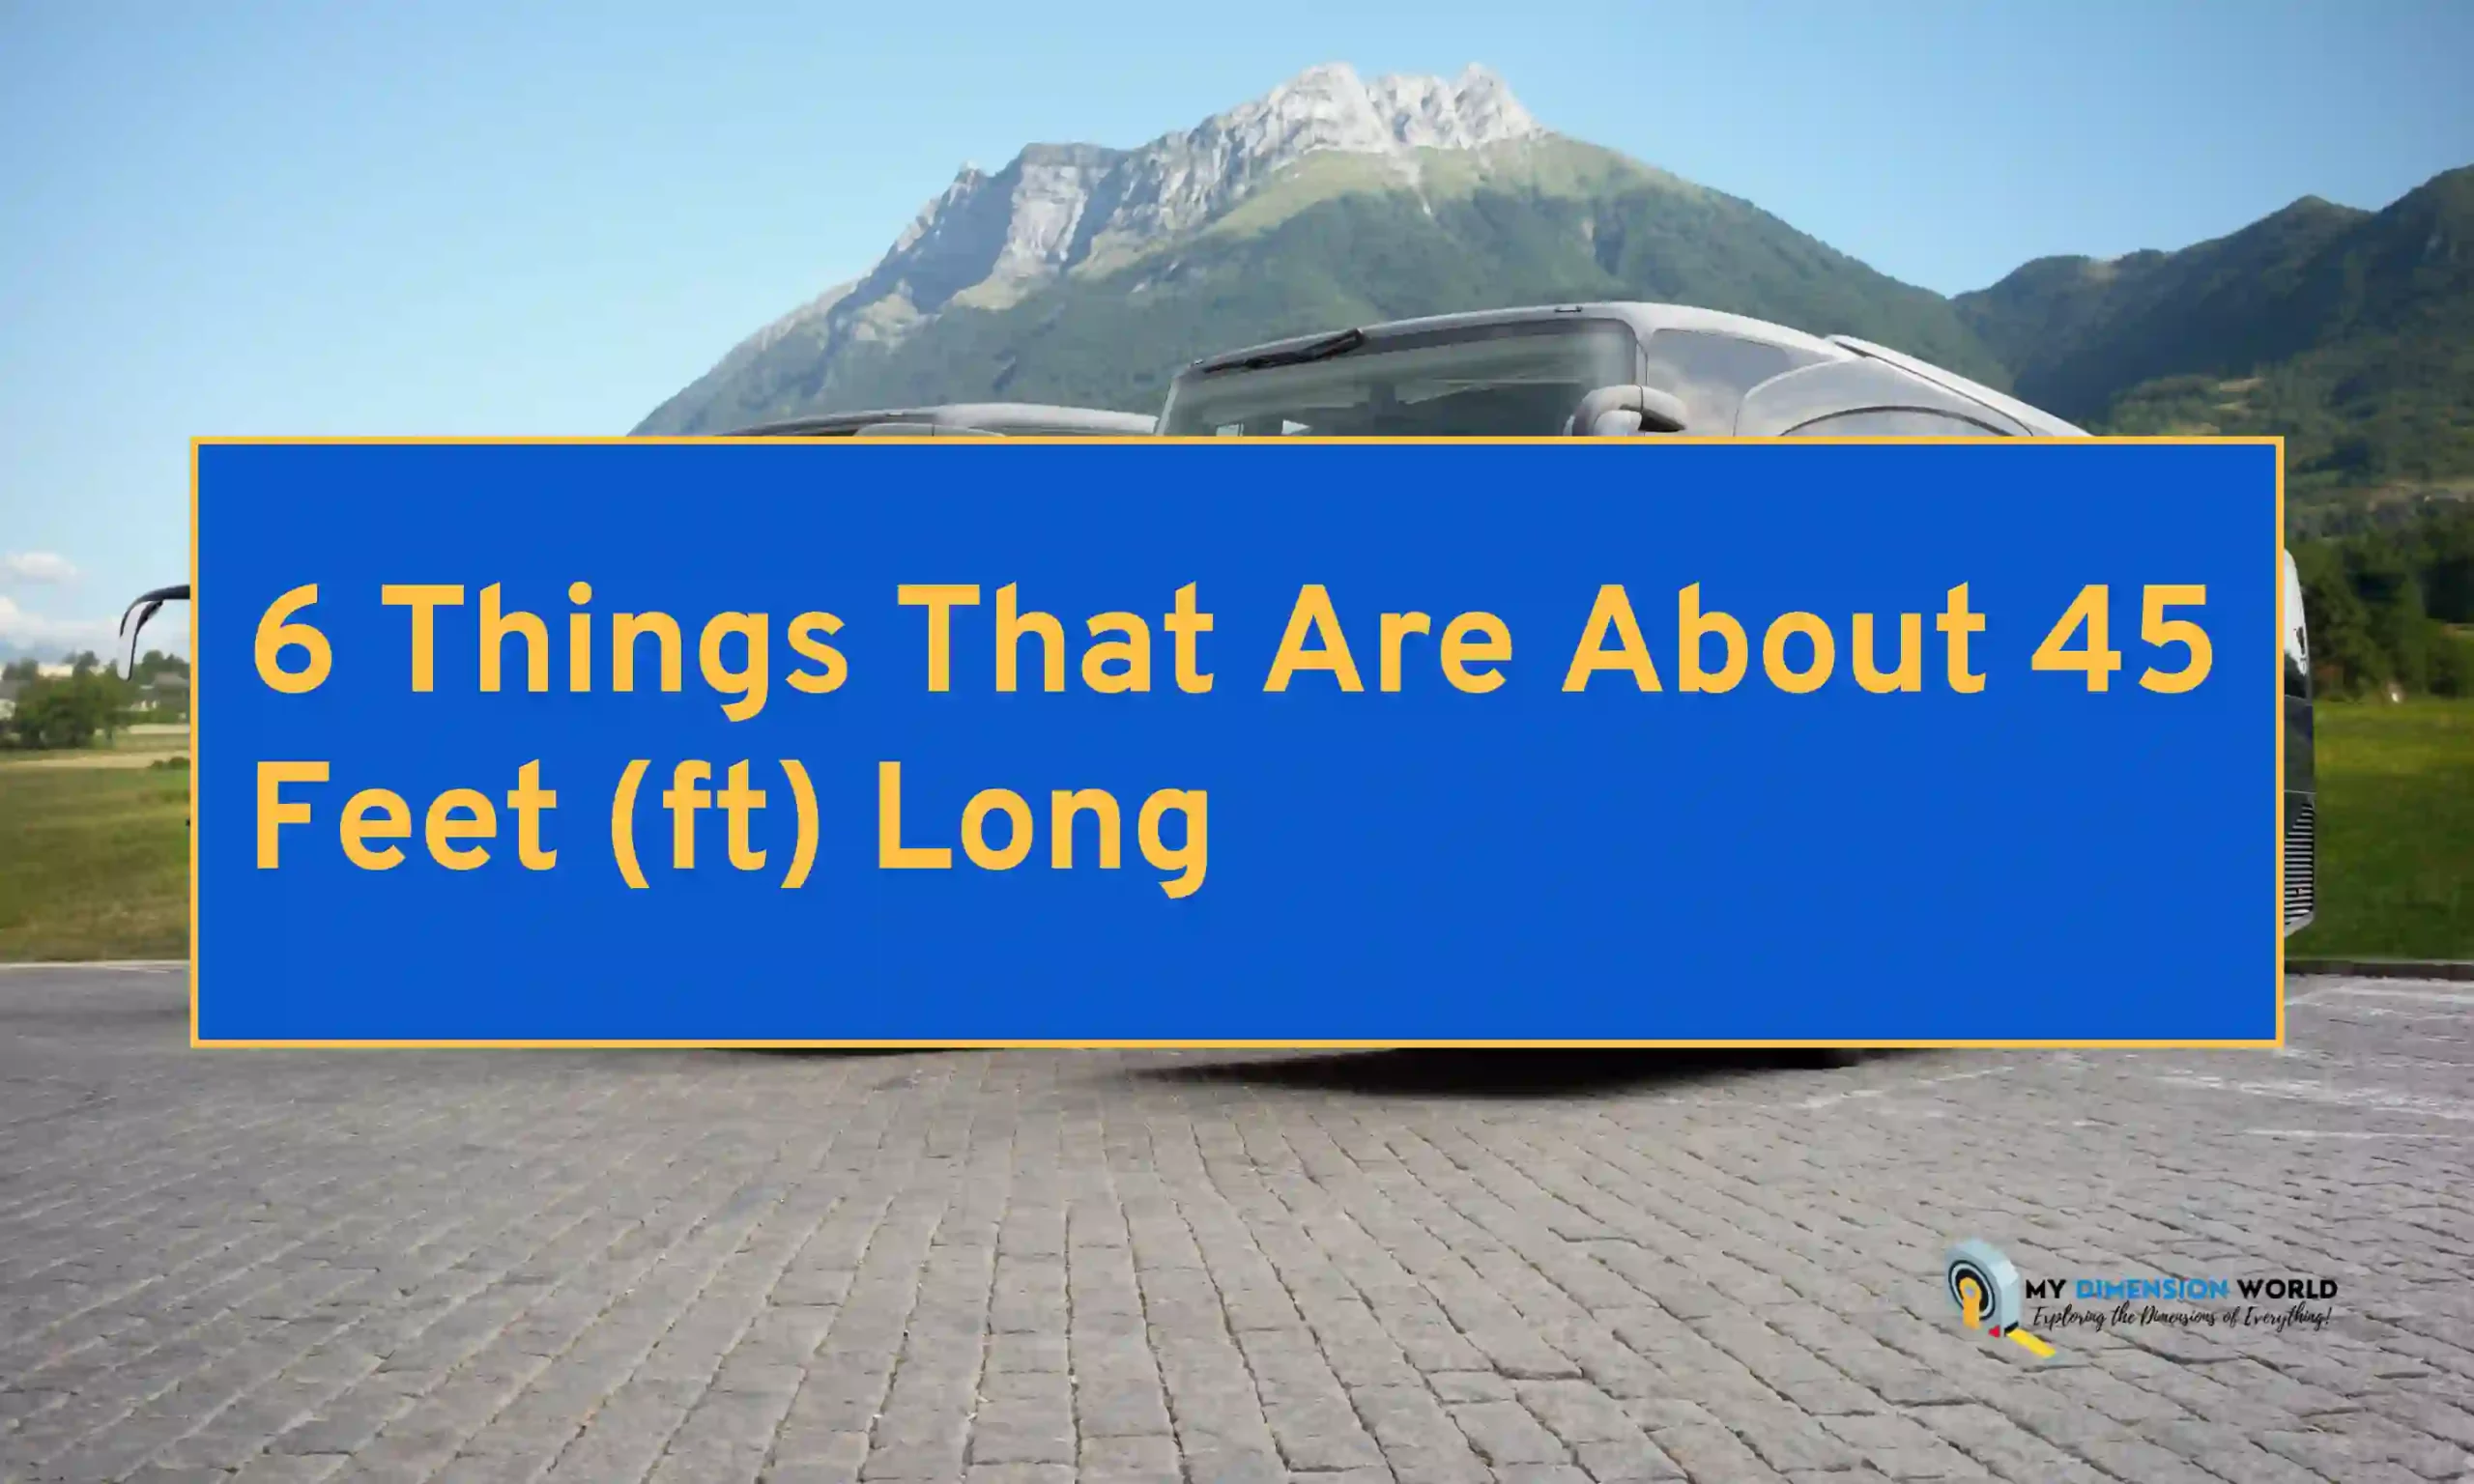 6 Things That Are About 45 Feet (ft) Long